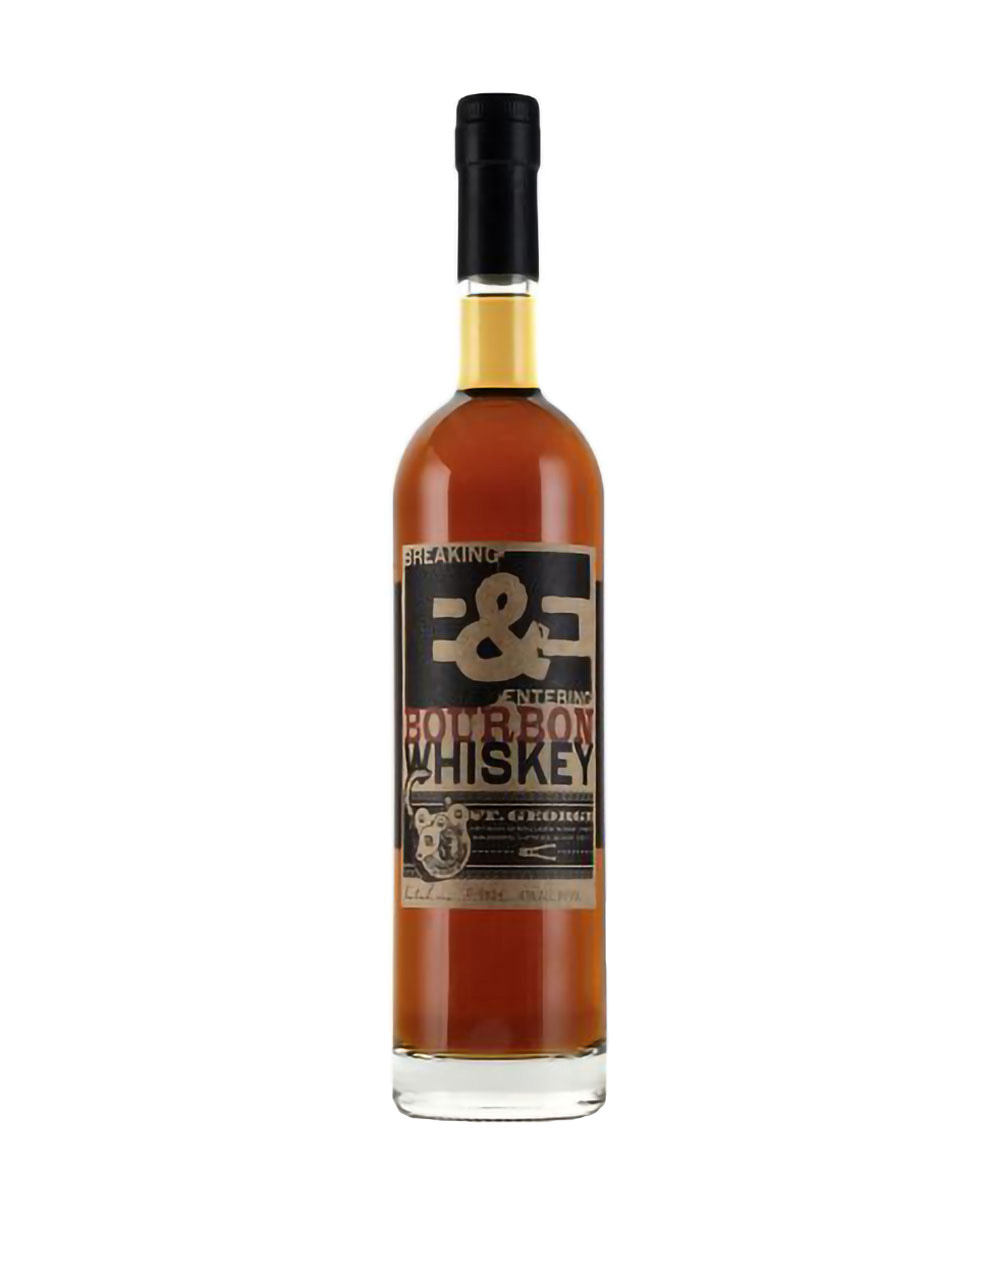 Woodford Reserve Kentucky Derby 140 Limited Edition Bourbon Whiskey